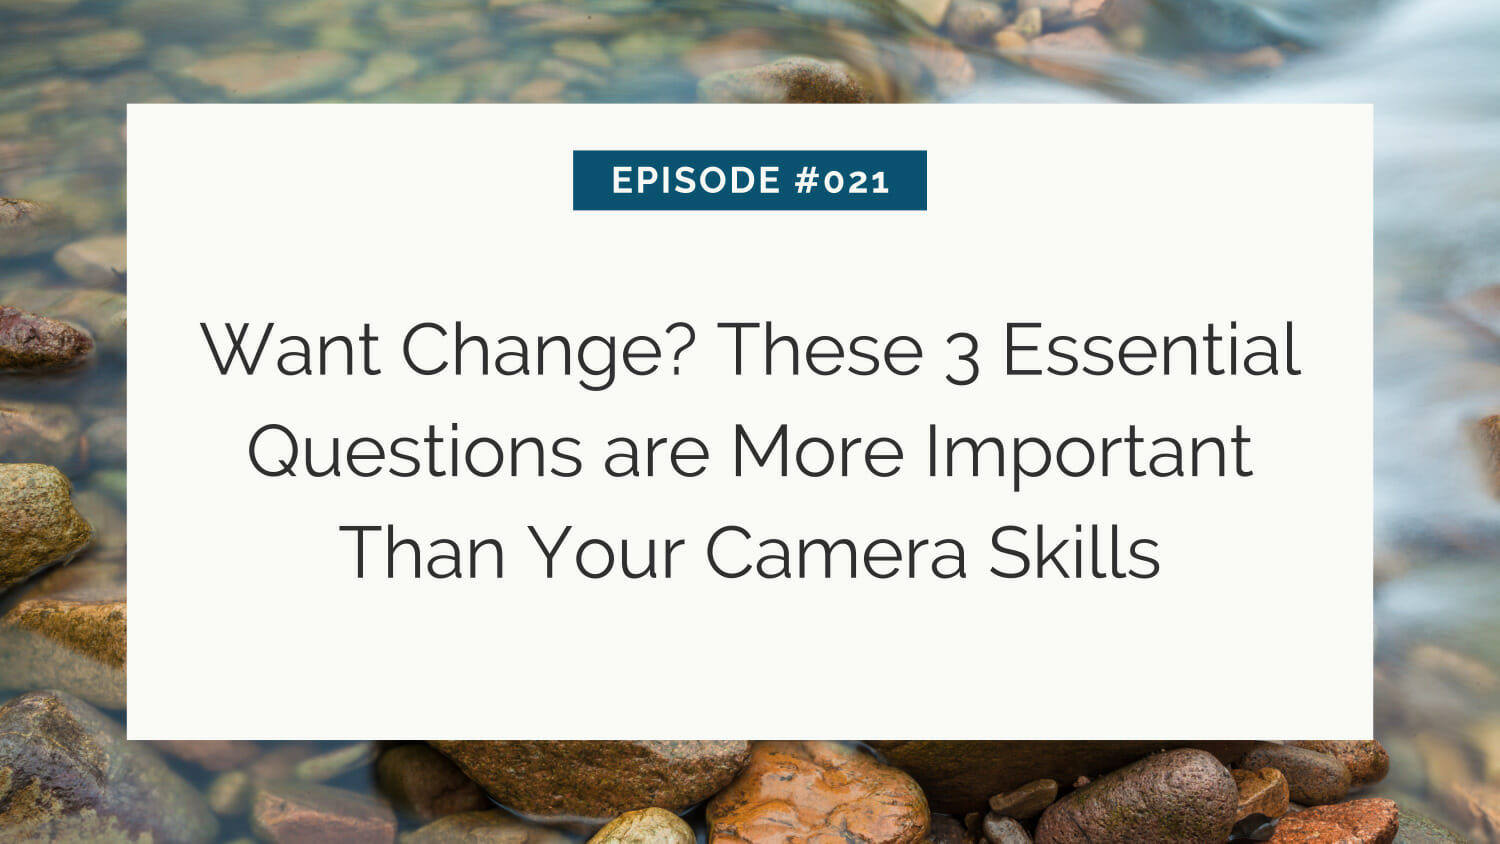 Promotional graphic for episode 021 discussing the importance of certain questions over camera skills for those seeking change.